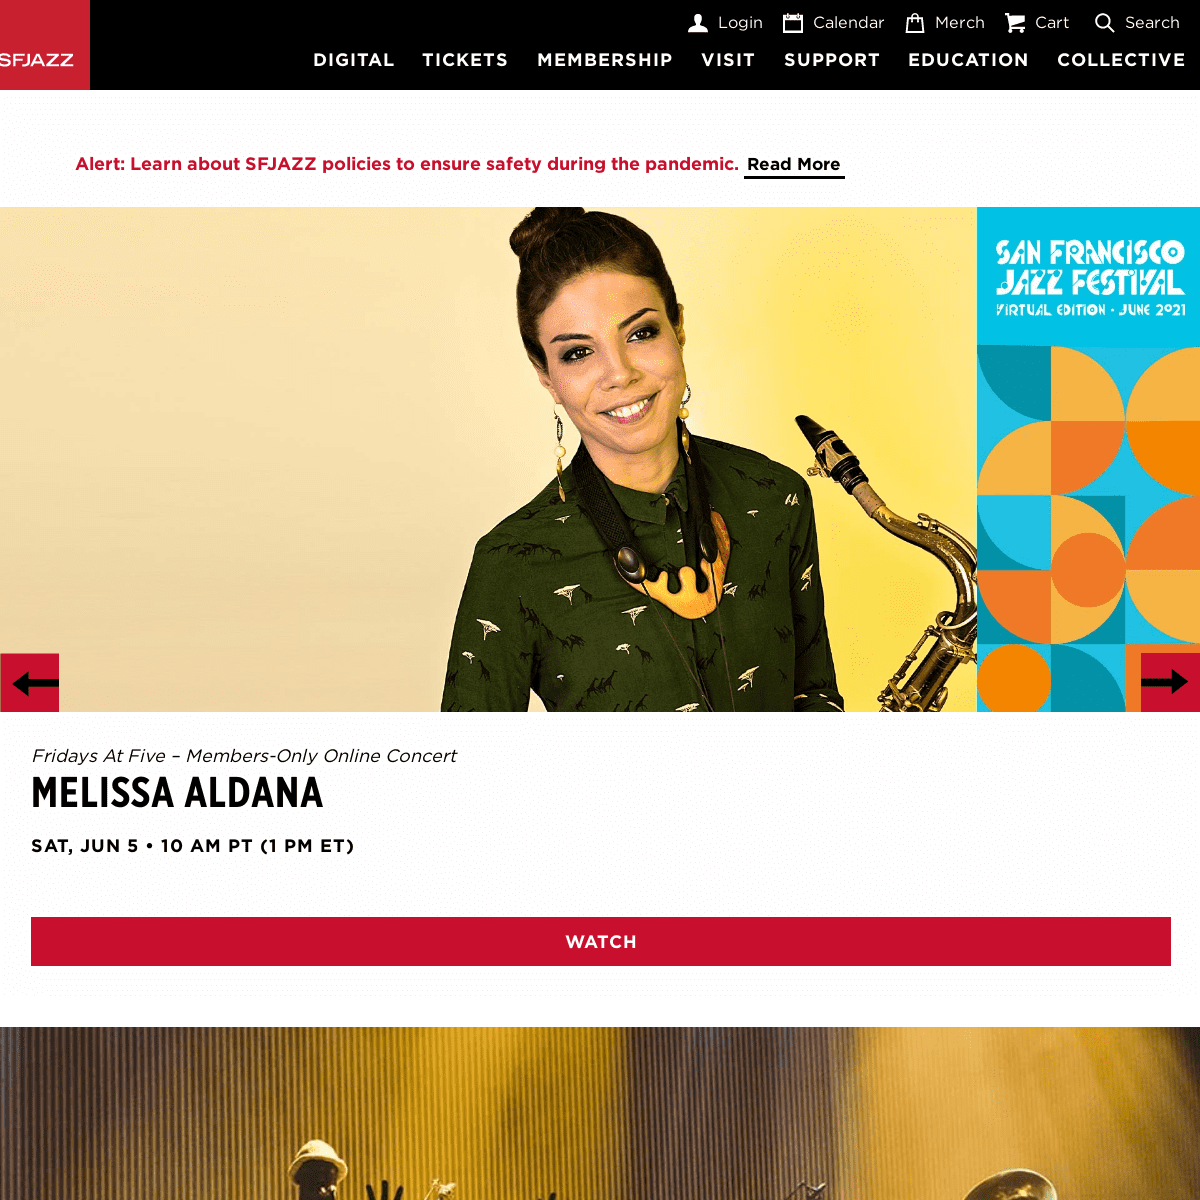 A complete backup of https://sfjazz.org